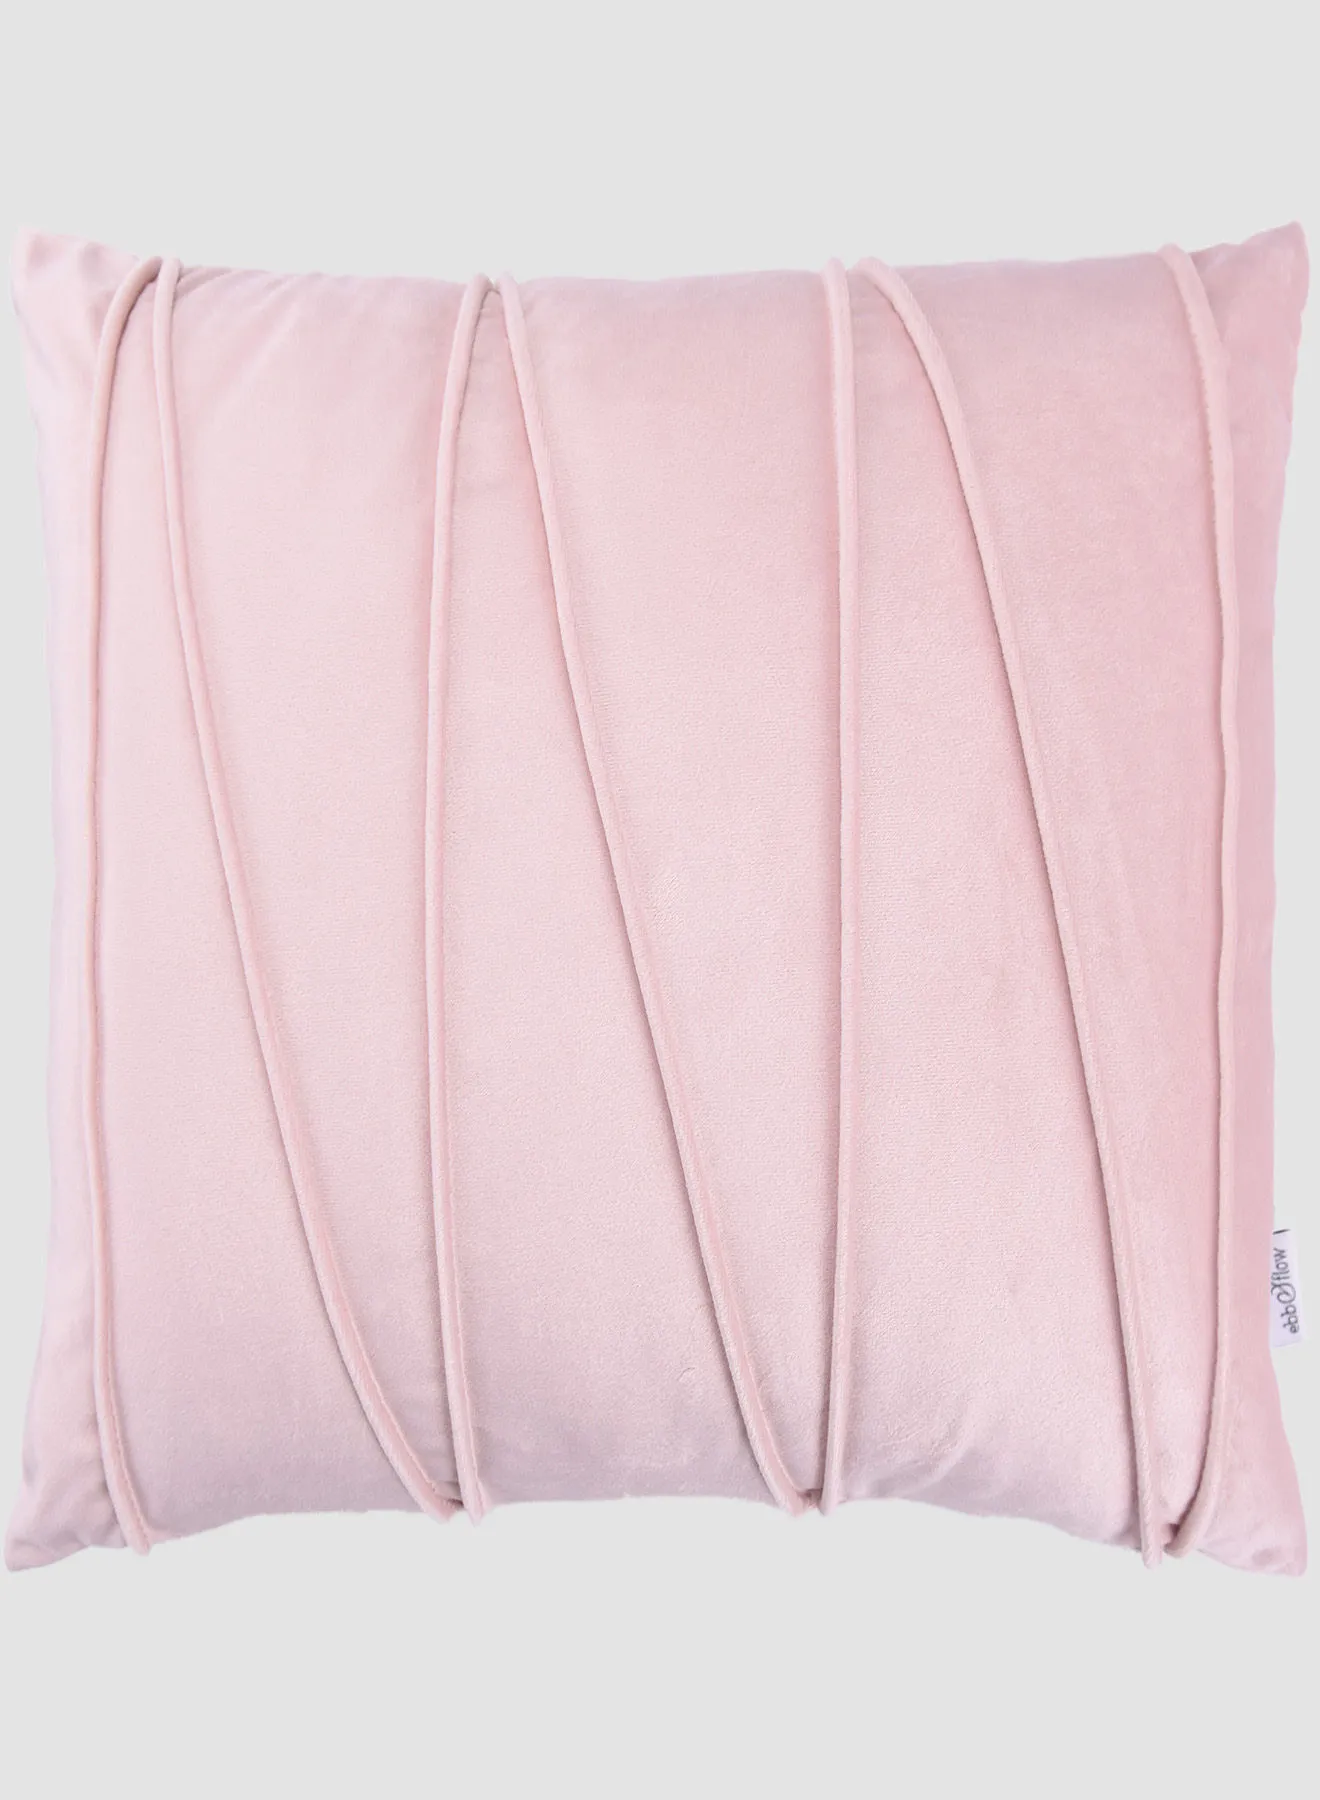 ebb & flow 3D Velvet Cushion  II,Unique Luxury Quality Decor Items for the Perfect Stylish Home Pink 55 x 55cm